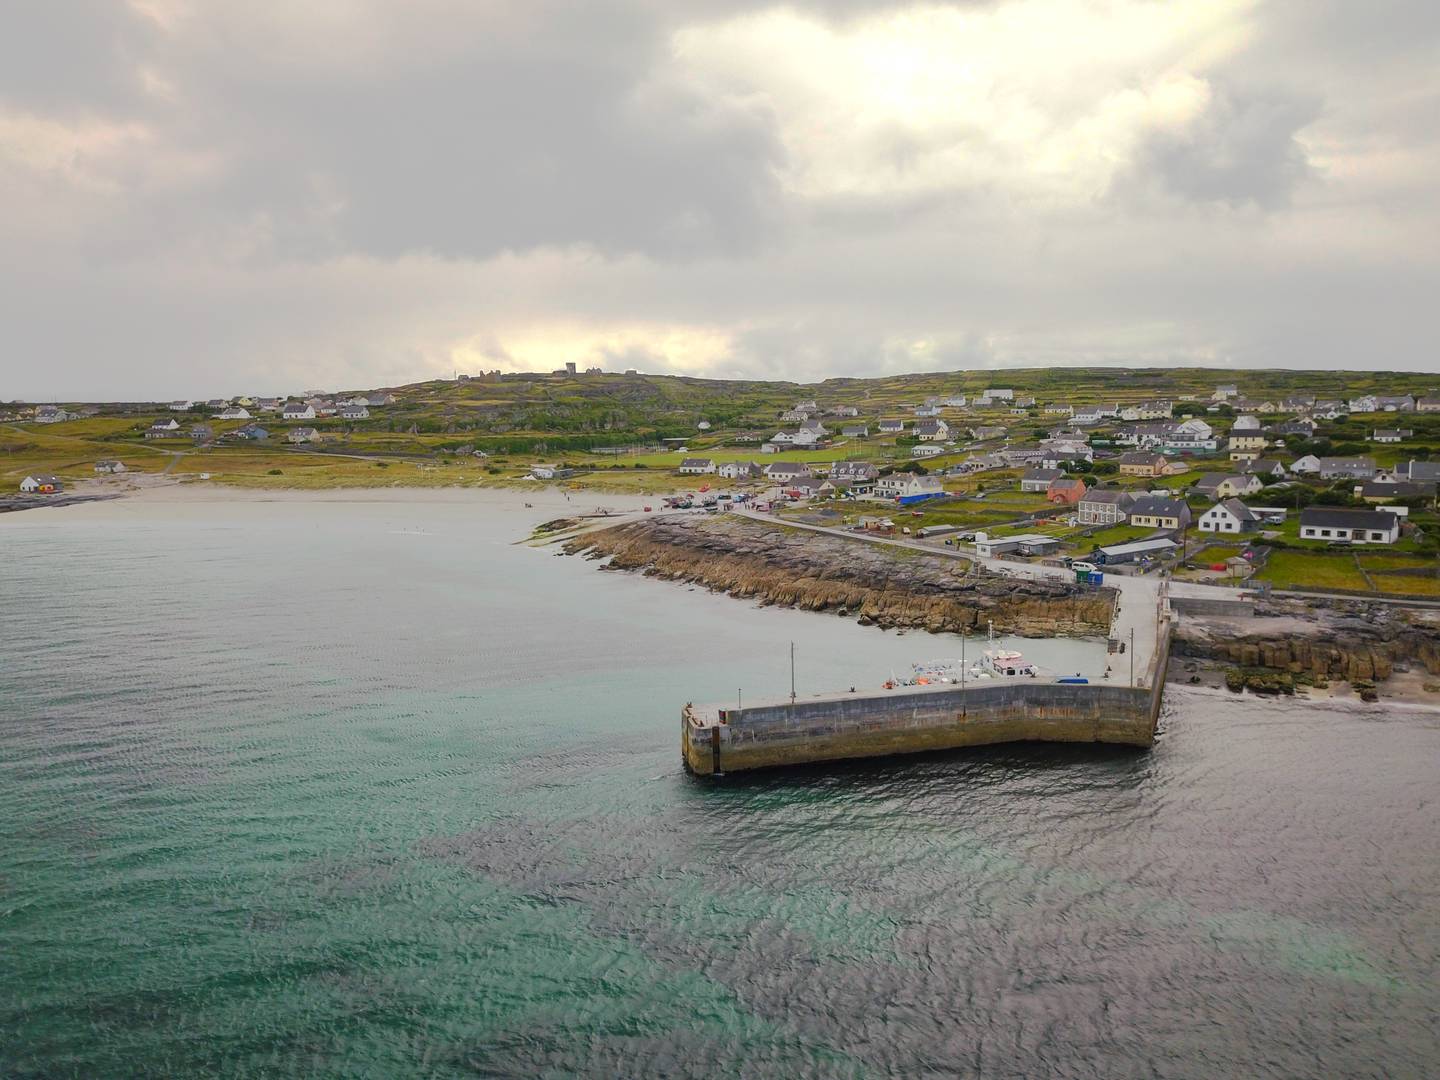 The harbour on Inis Oírr / Inisheer is in the process of a major development